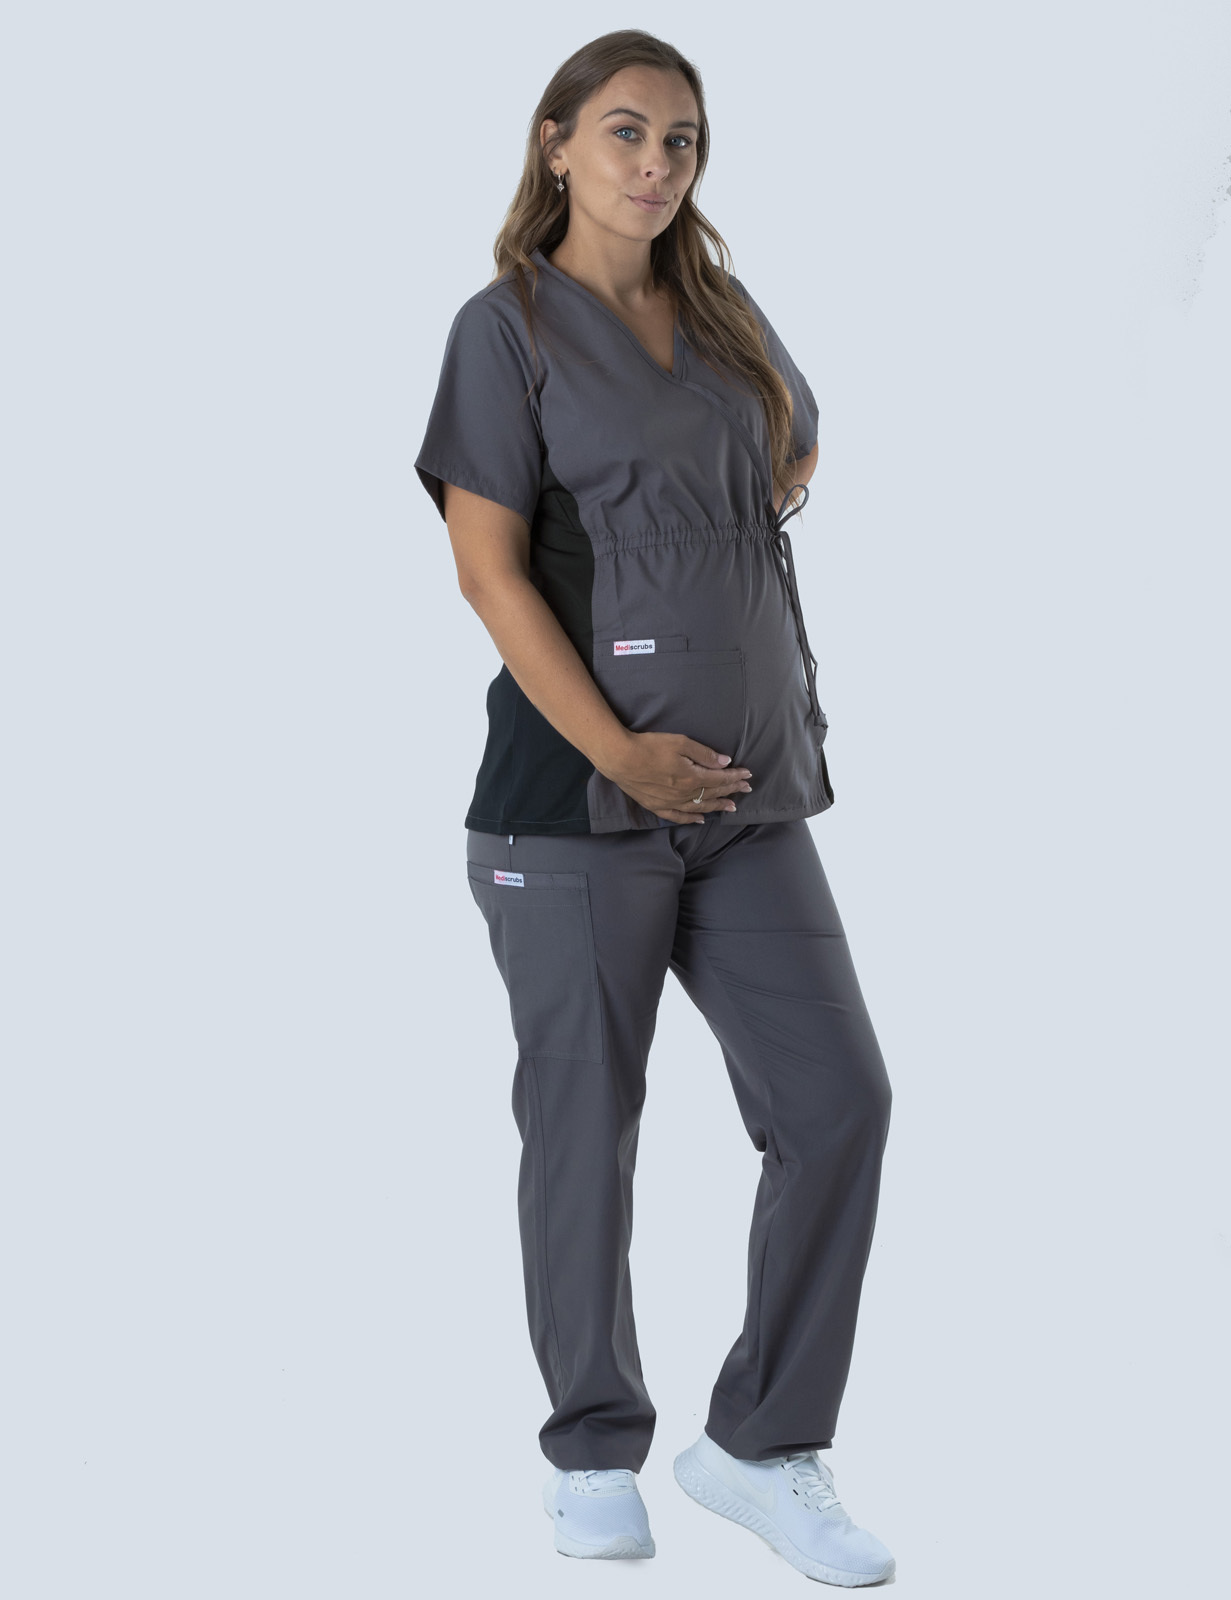 Maternity Scrub Top With Spandex Panel - Steel Grey - 4X large - 2